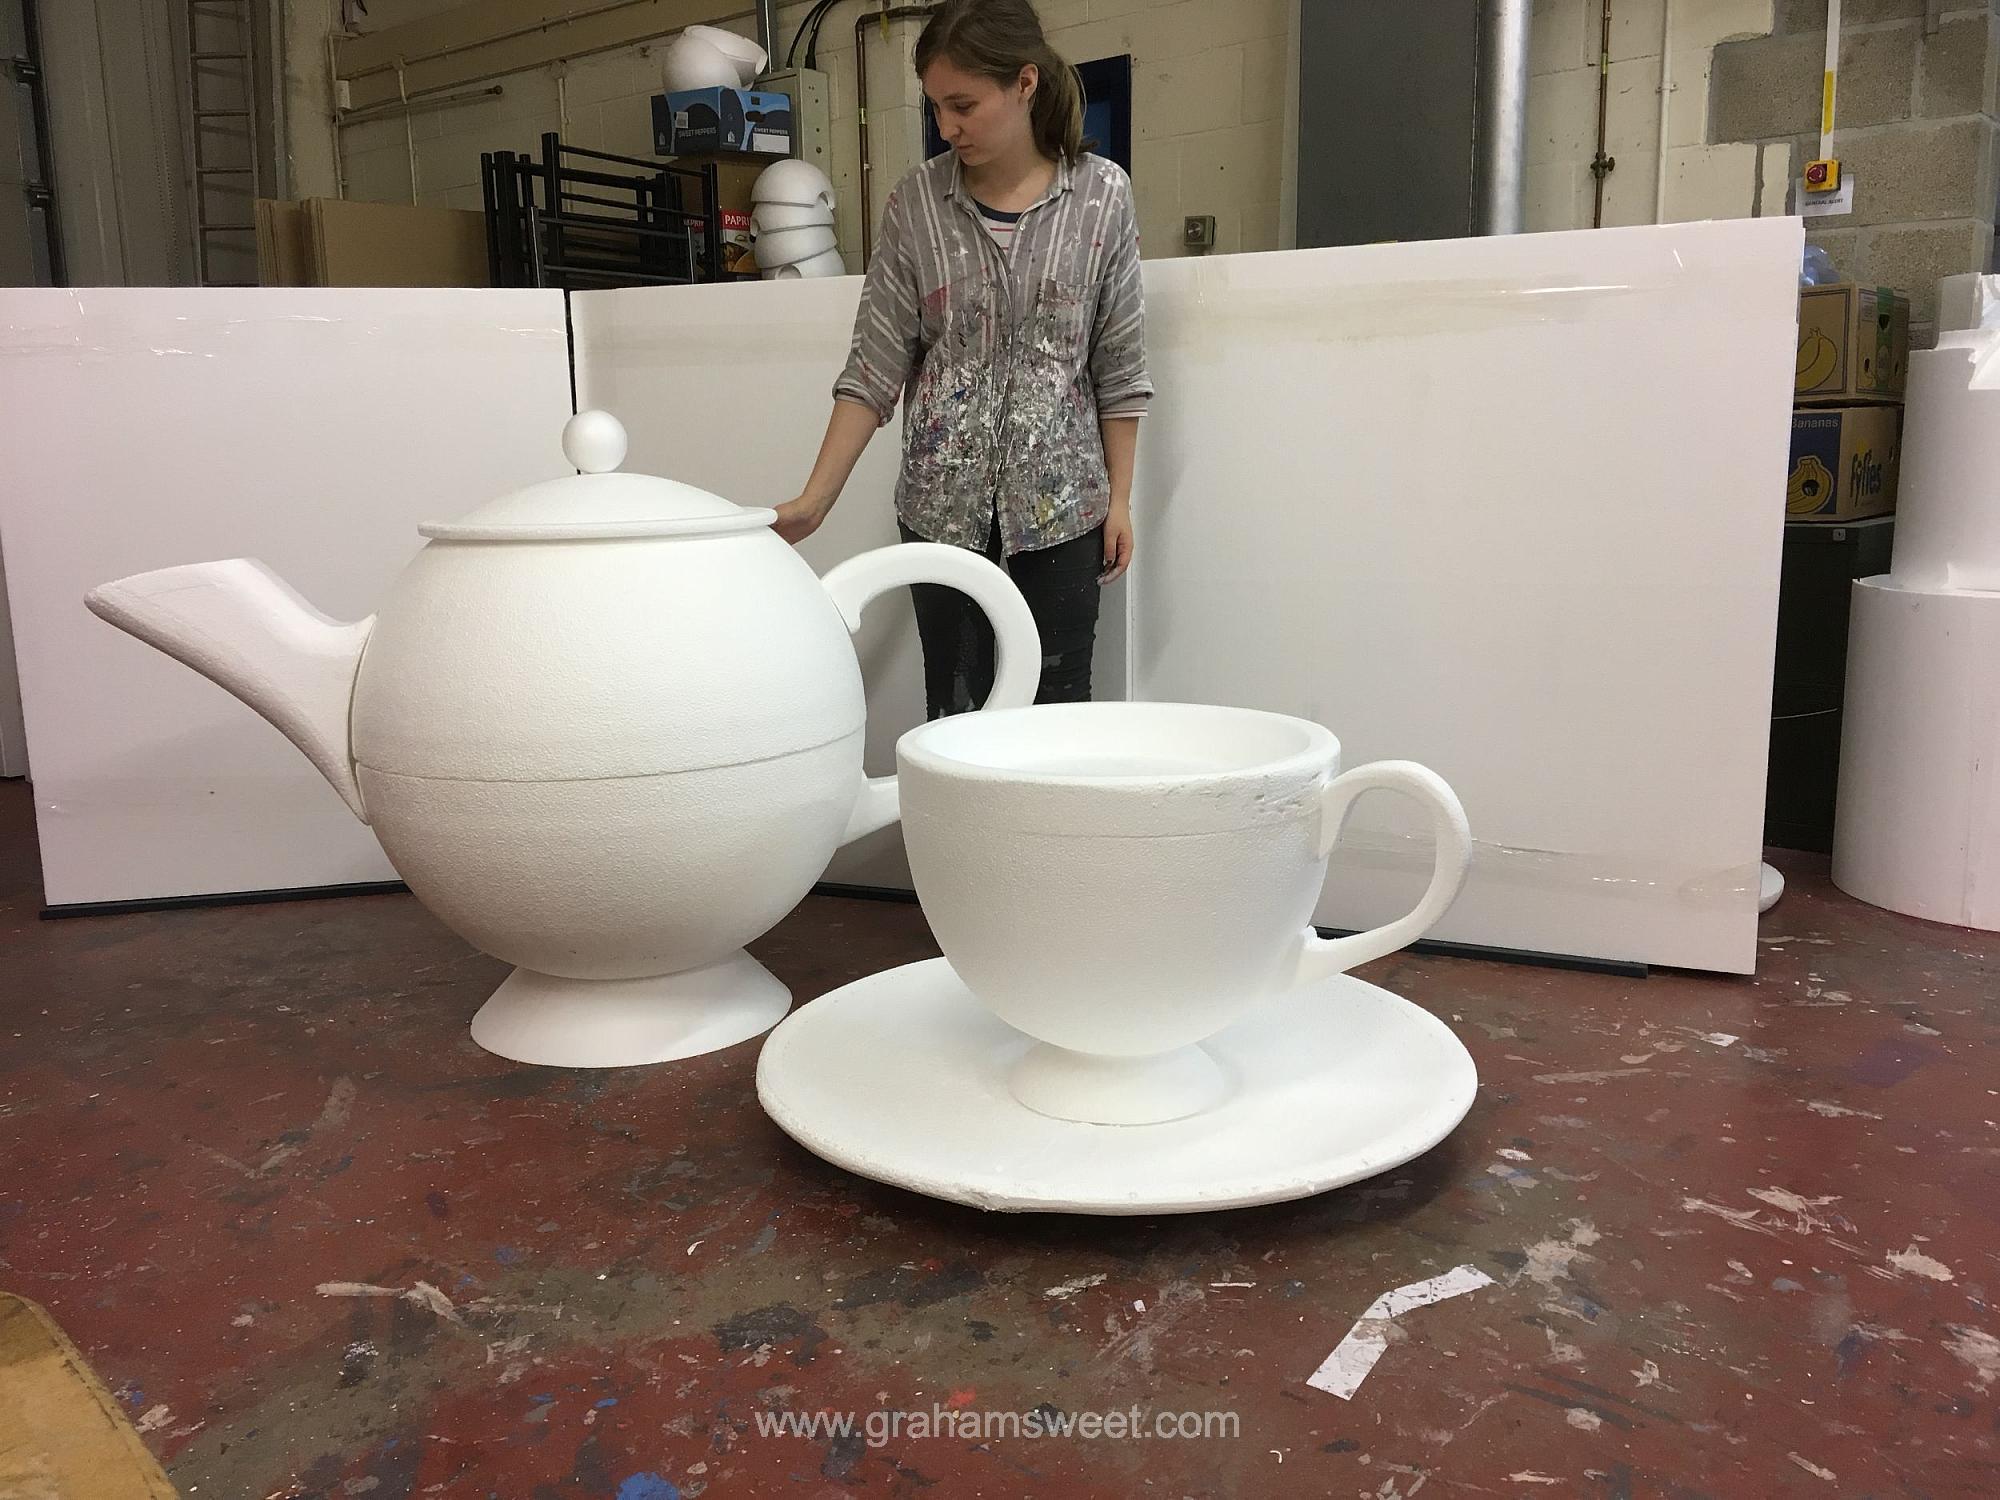 giant polystyrene cup and saucer